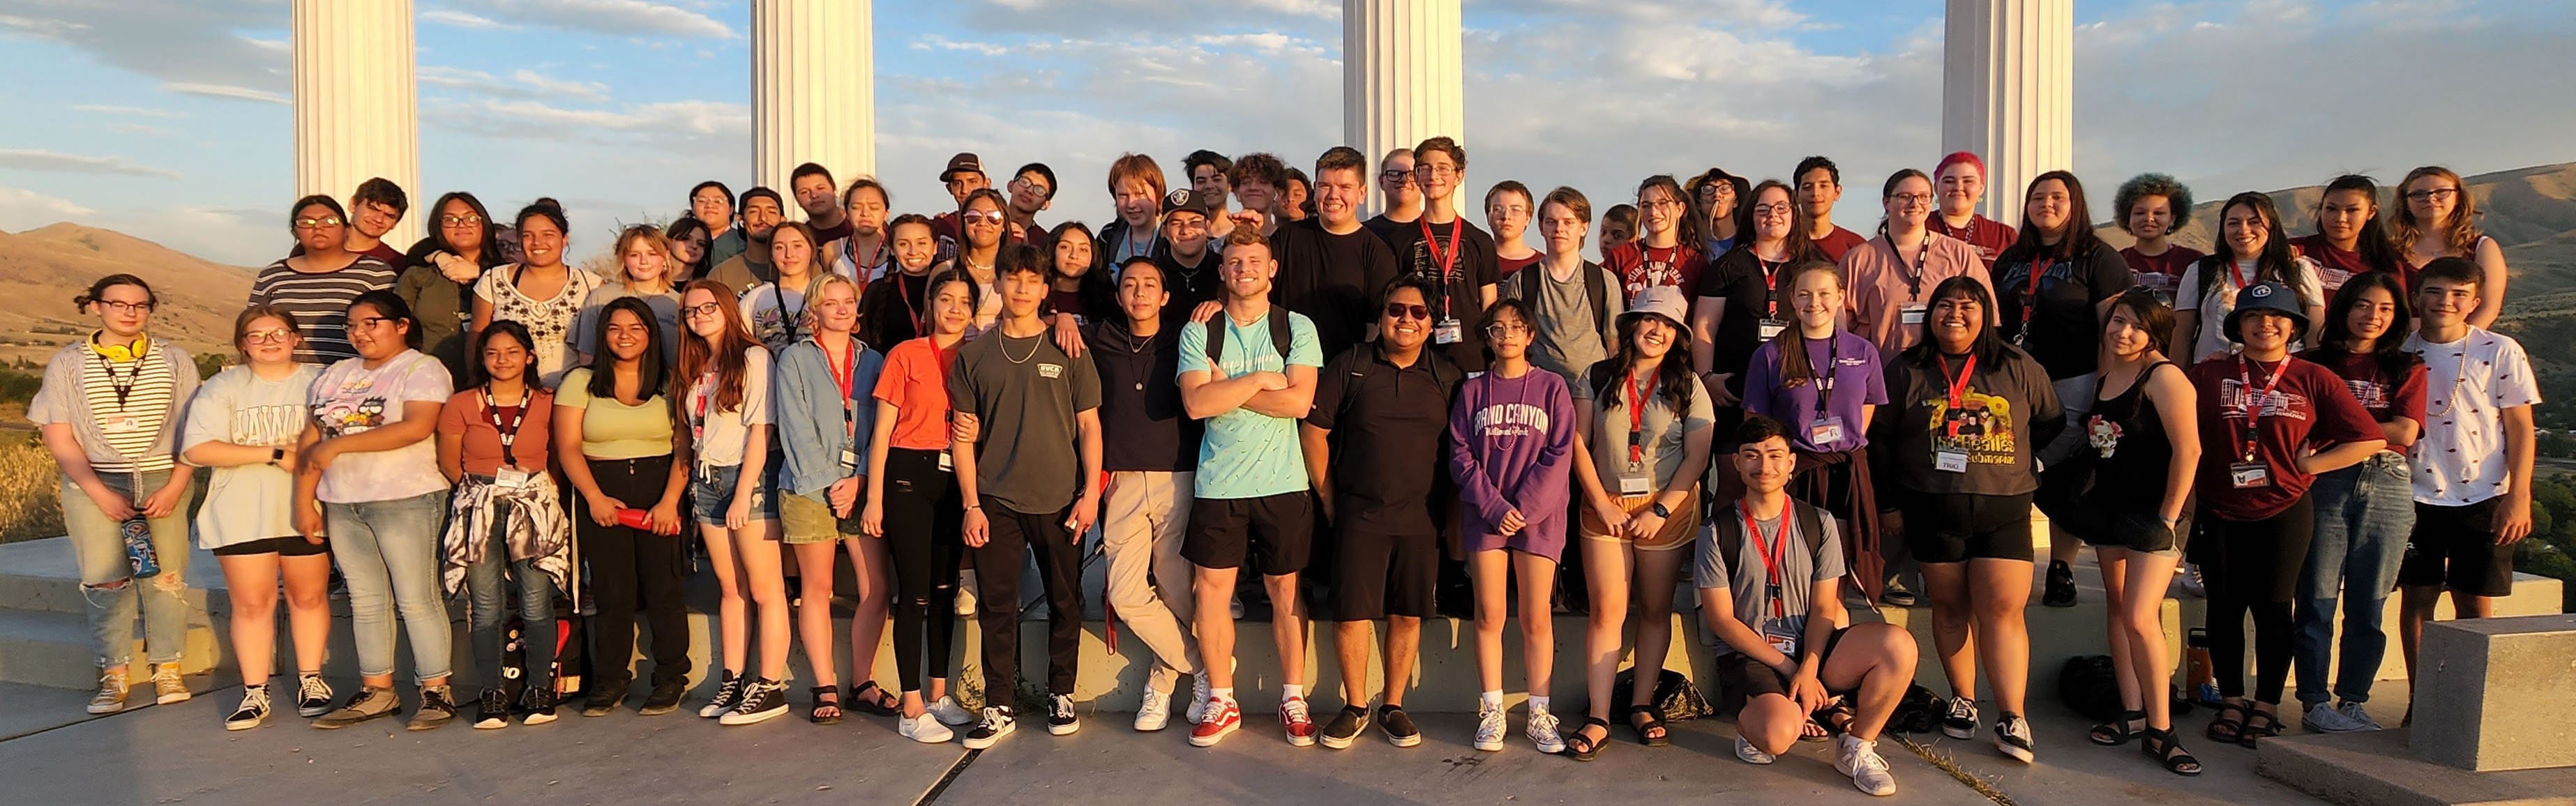 Upward Bound Programs students and mentors standing in front of ISU's pillars near sunset.